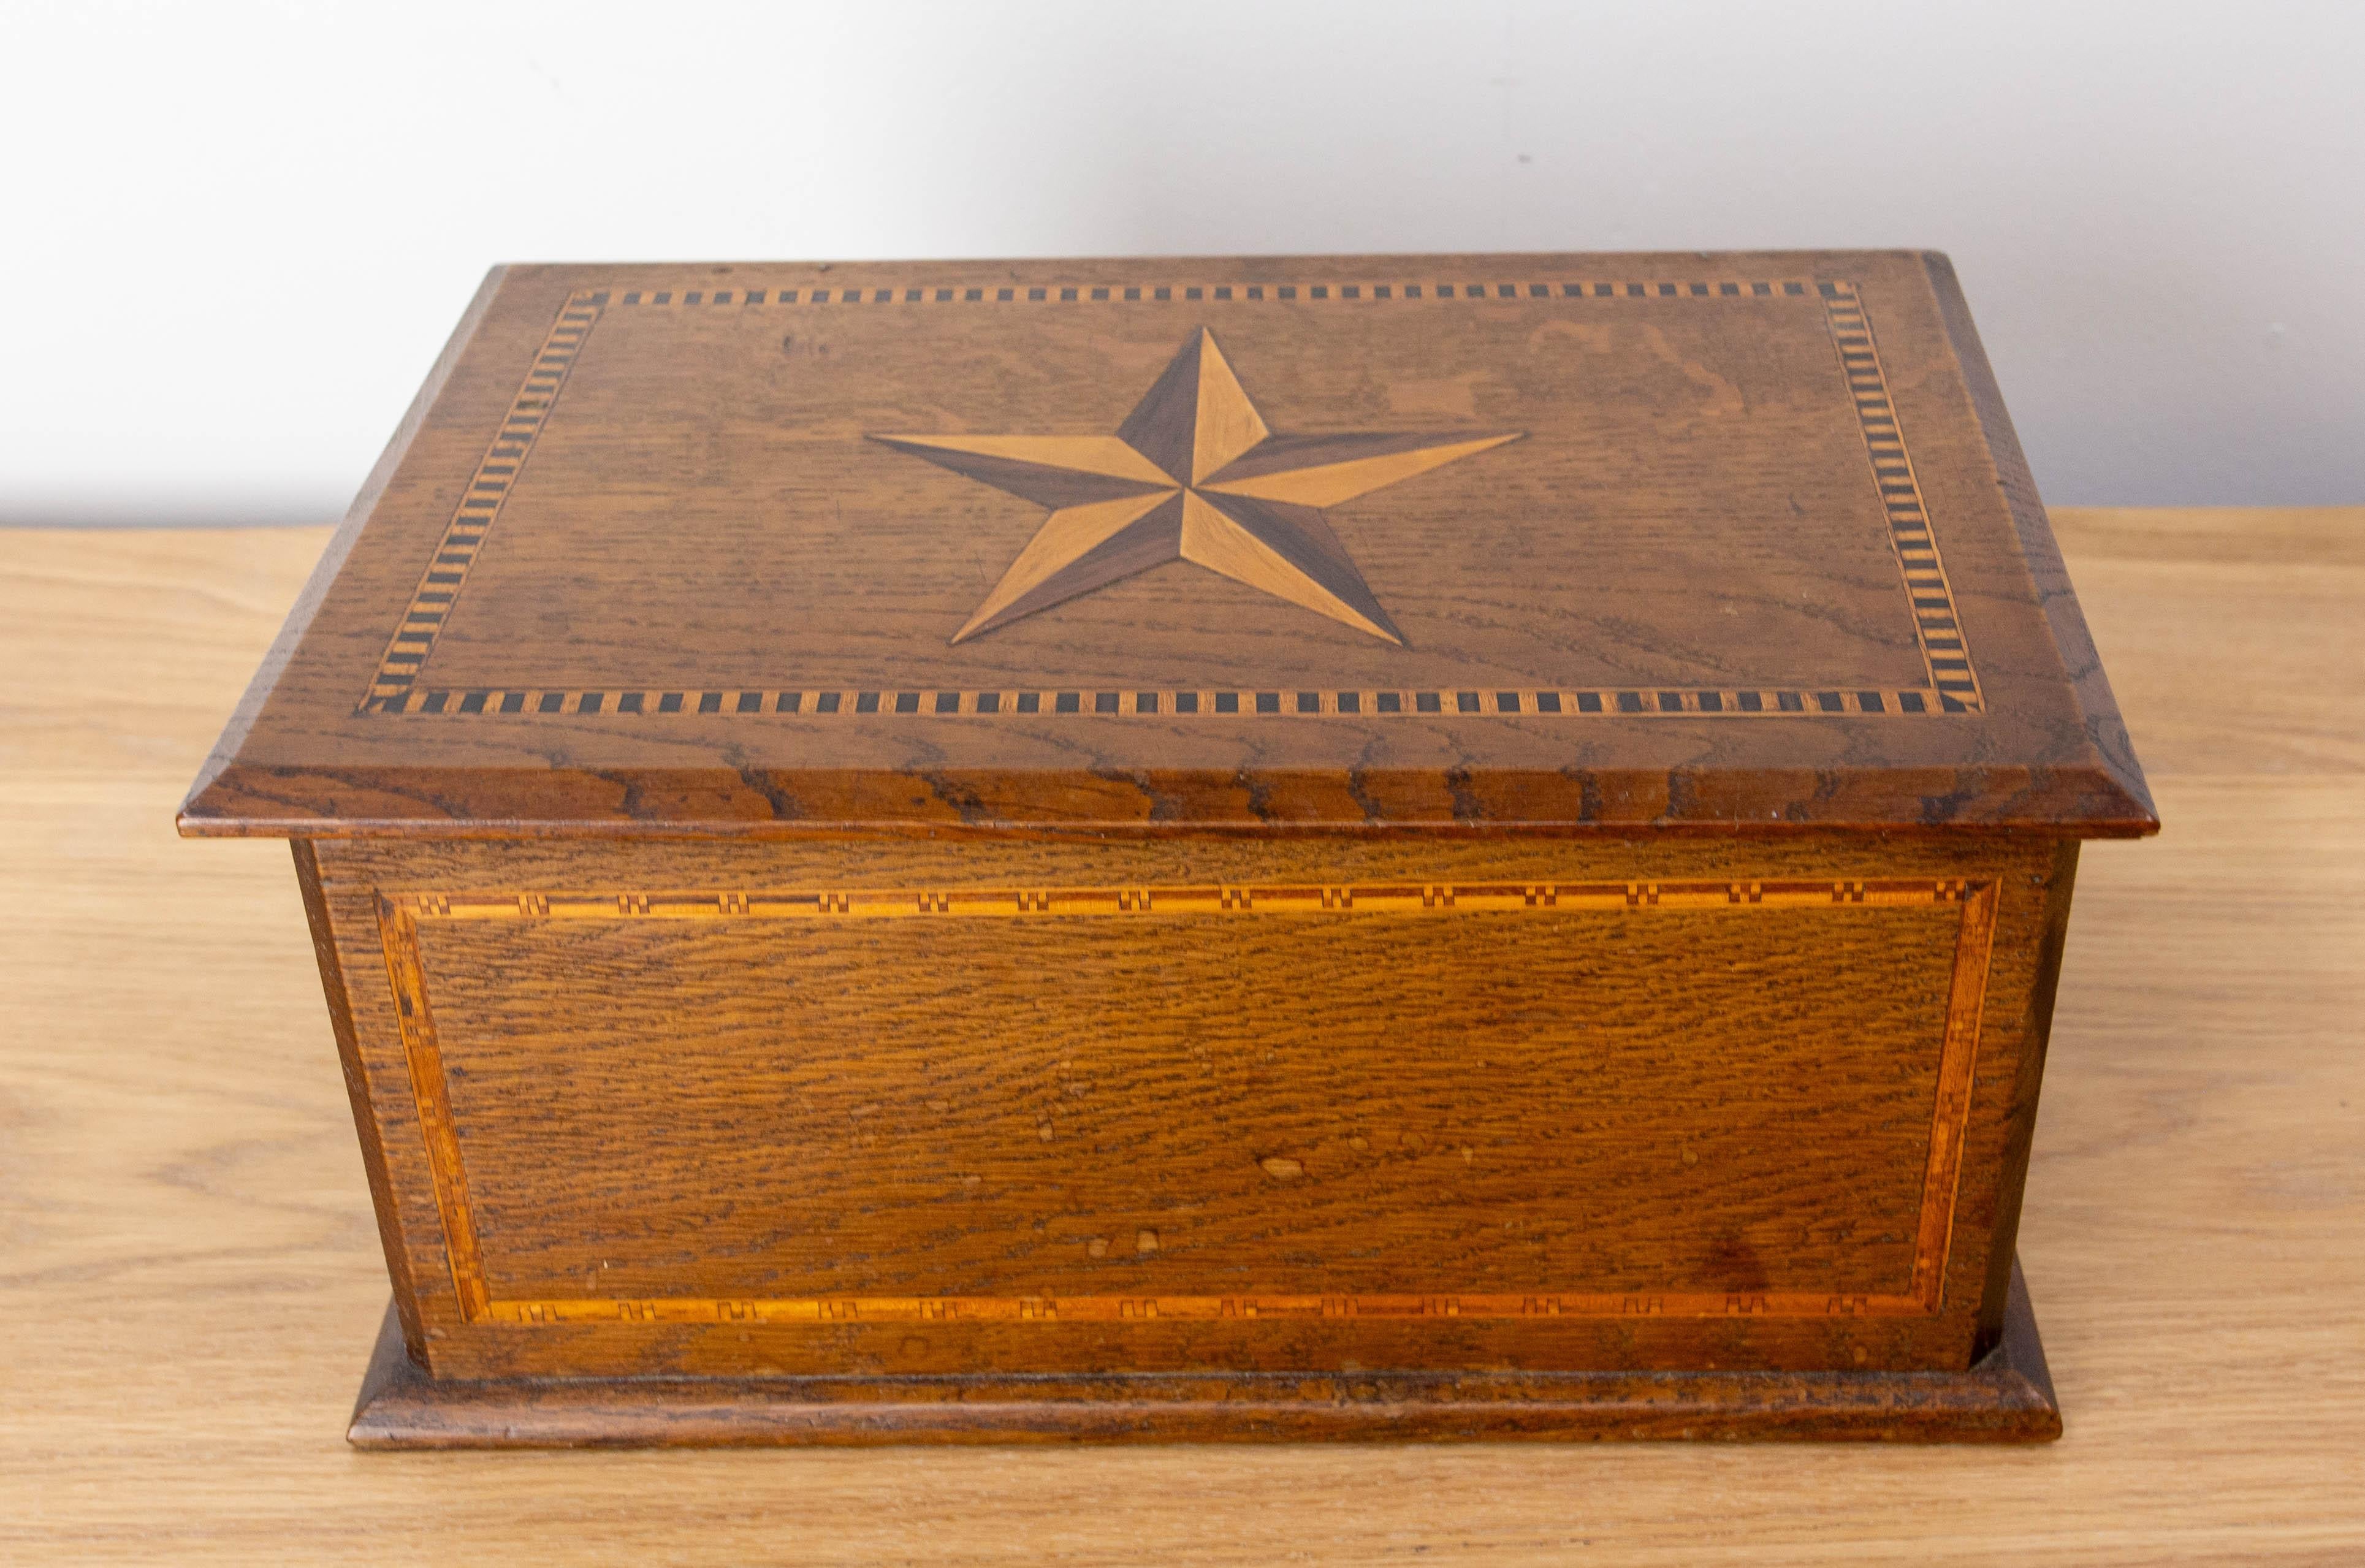 French wood box decorated with marquetry including a star on the top.
Made circa 1920.
Good condition with traces of water on the sides.

Shipping:
21 / 32.5 / 15 cm 1.7 kg